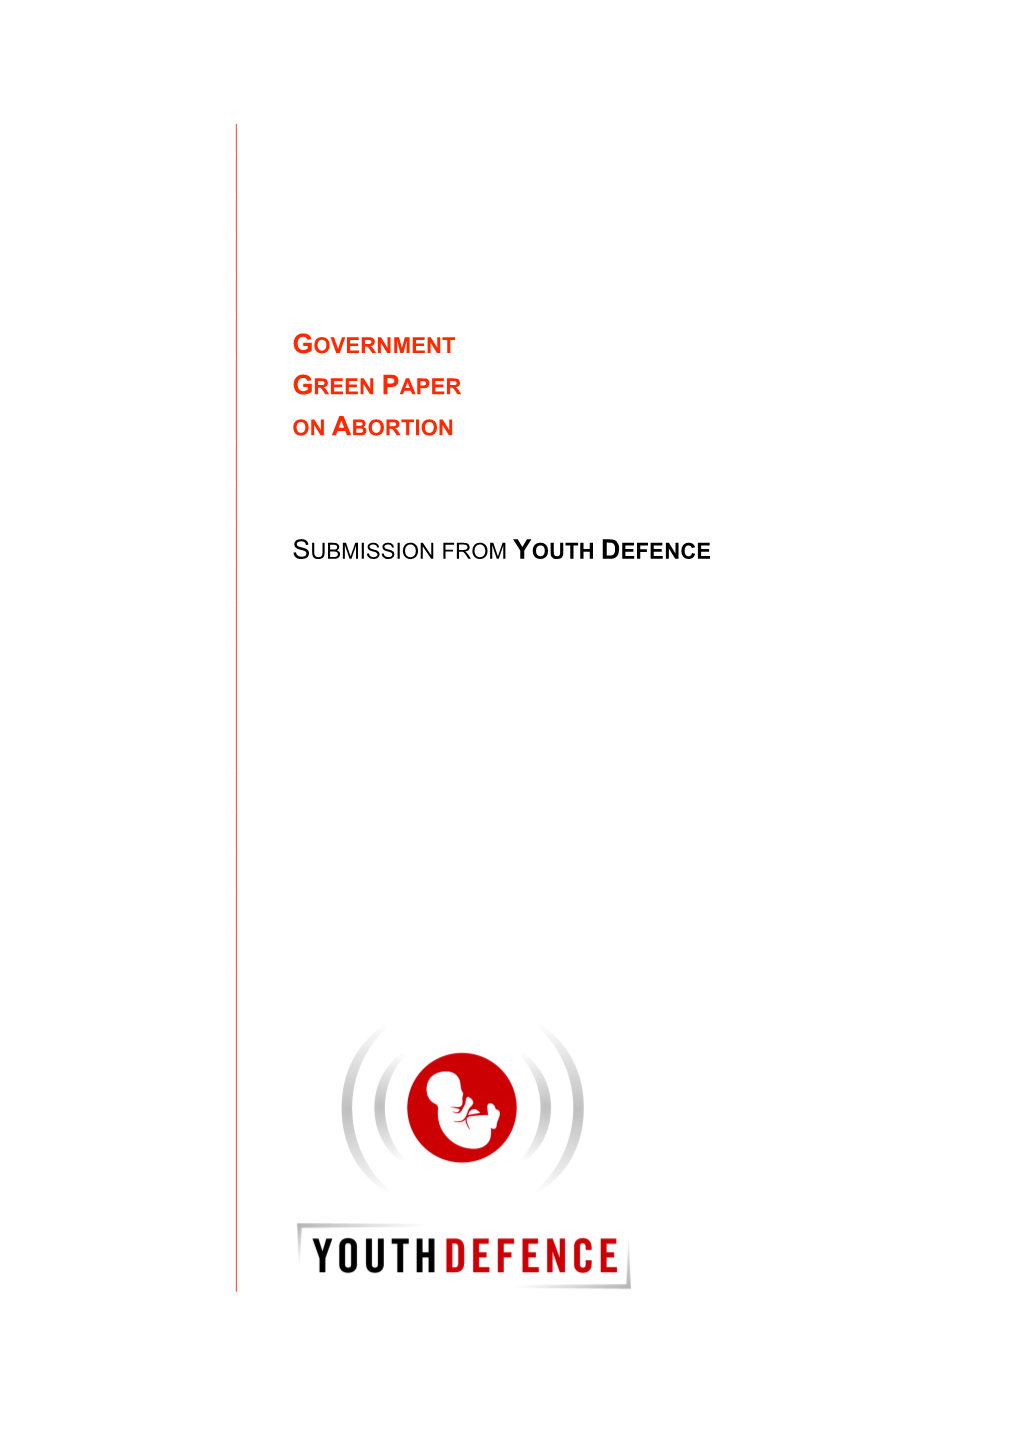 GOVERNMENT GREEN PAPER on ABORTION SUBMISSION from YOUTH Defence